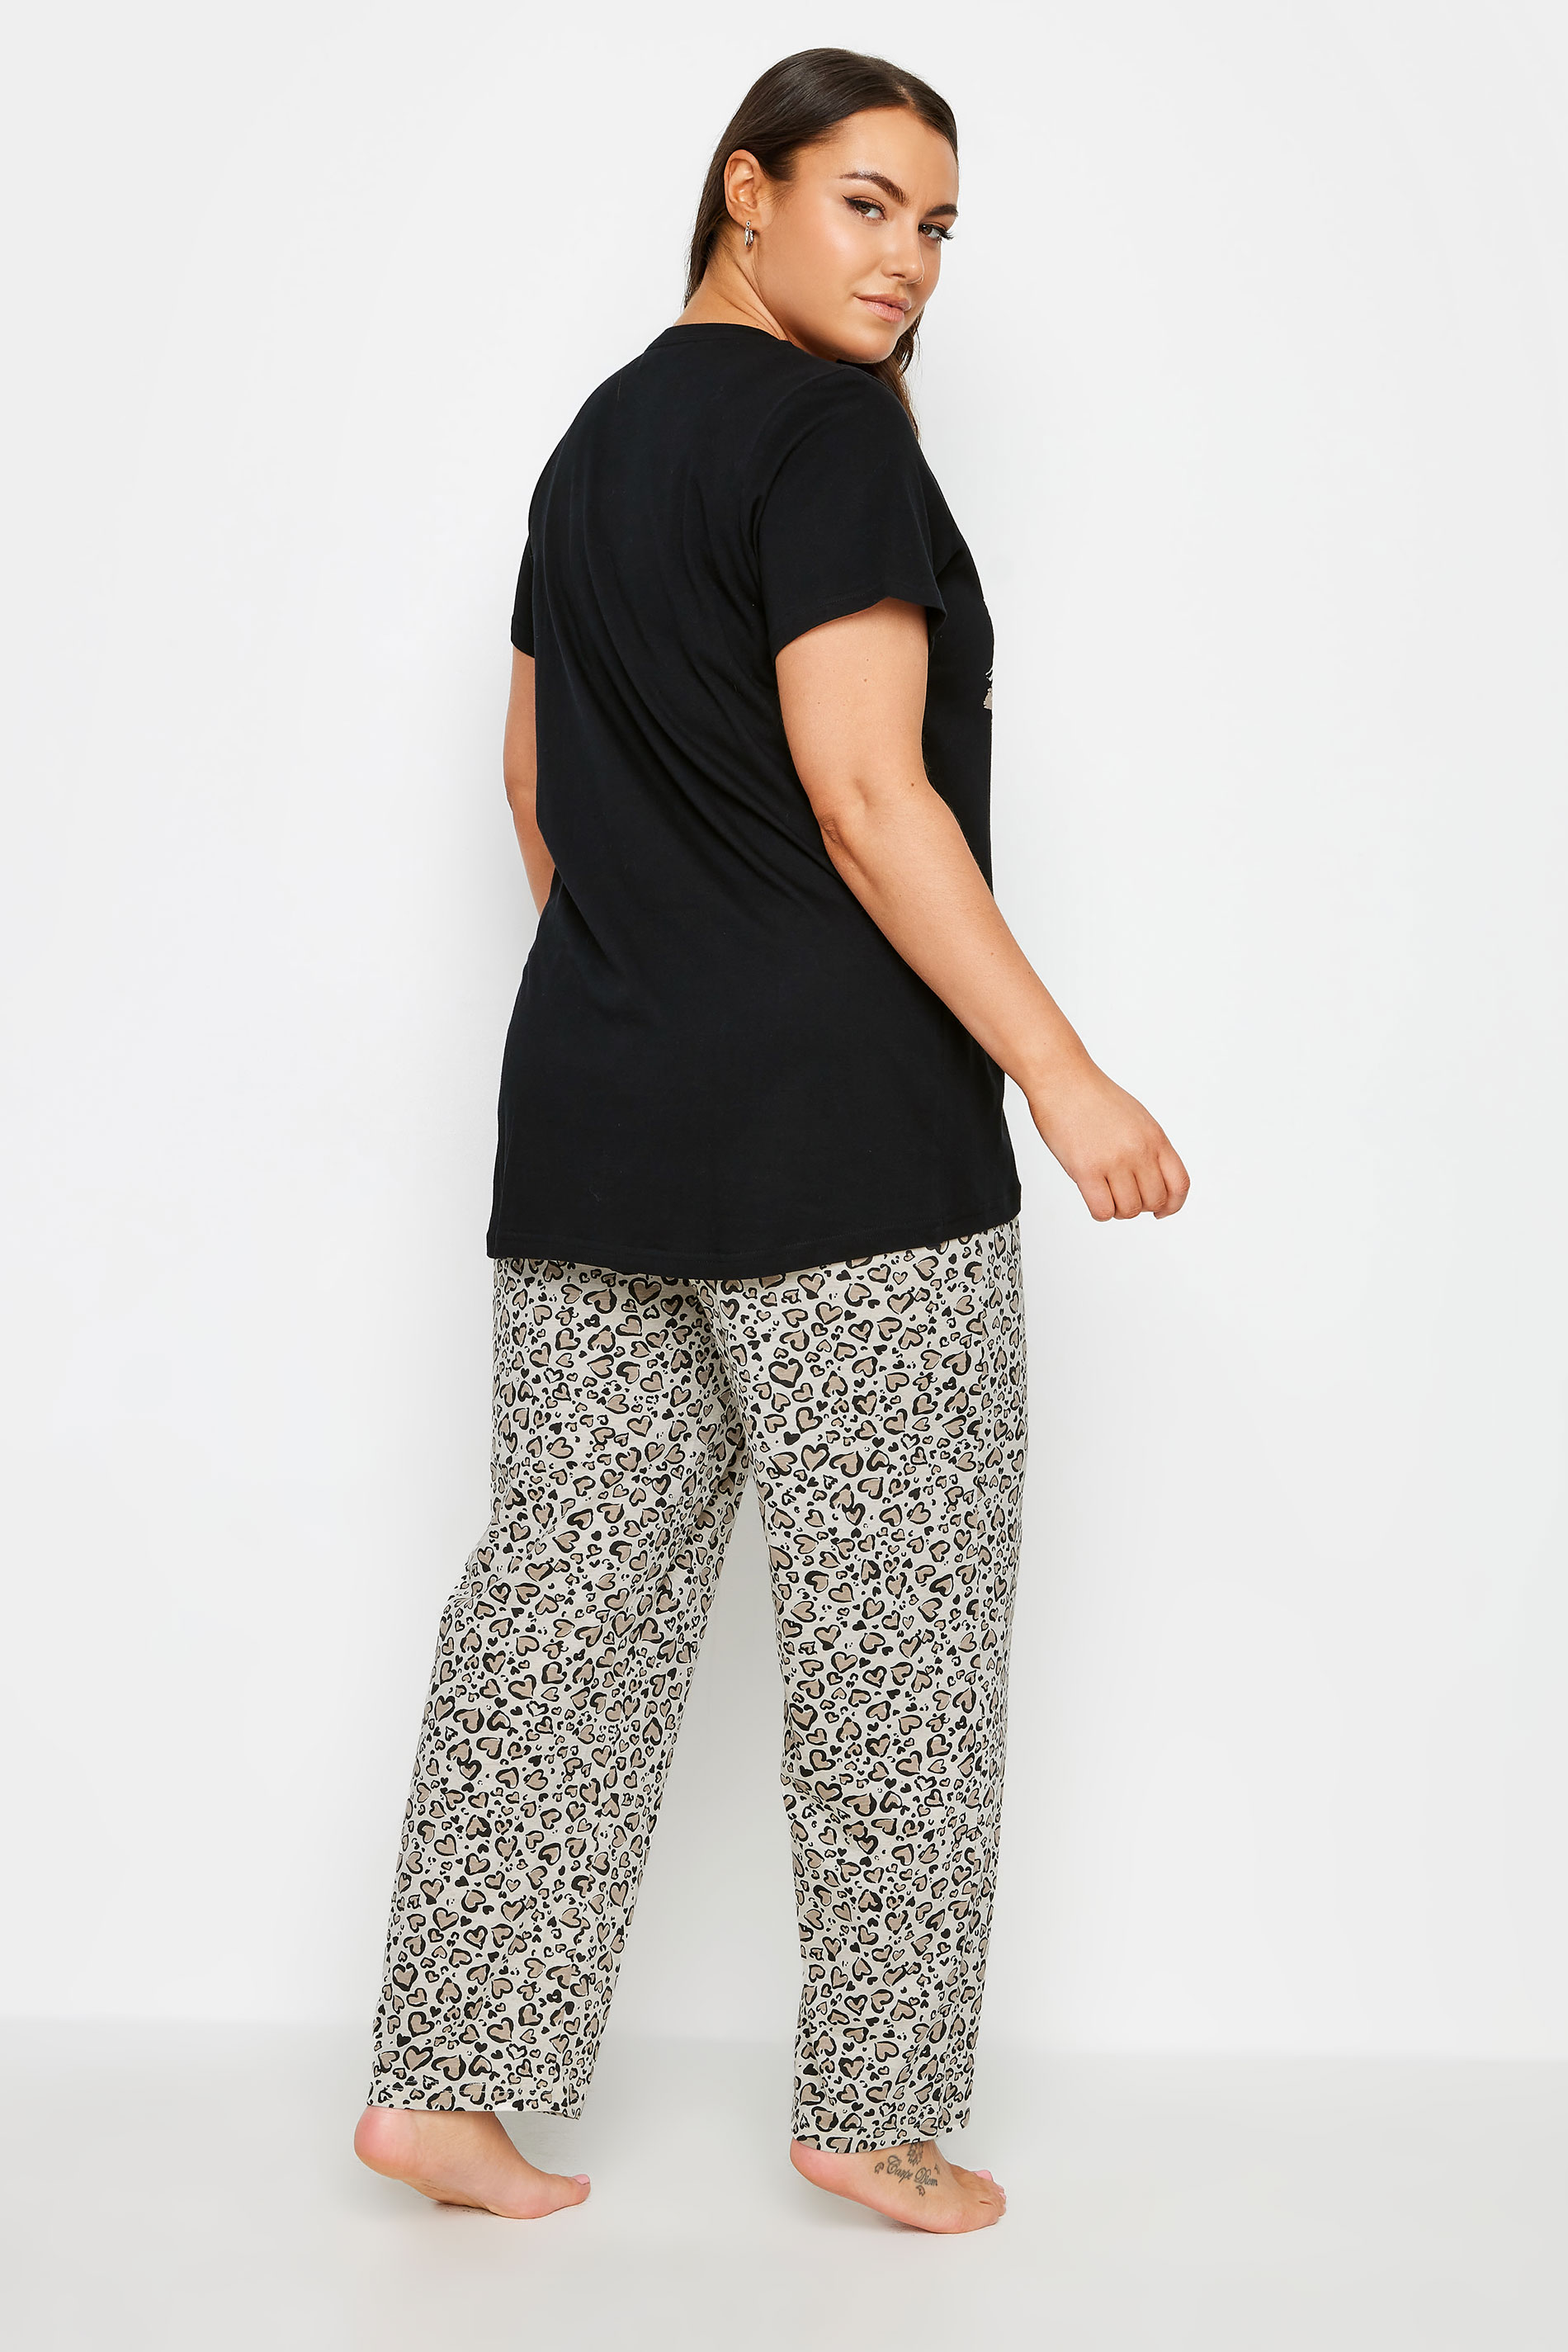 YOURS Plus Size Black 'Wild At Heart' Leopard Print Pyjama Set | Yours Clothing 3